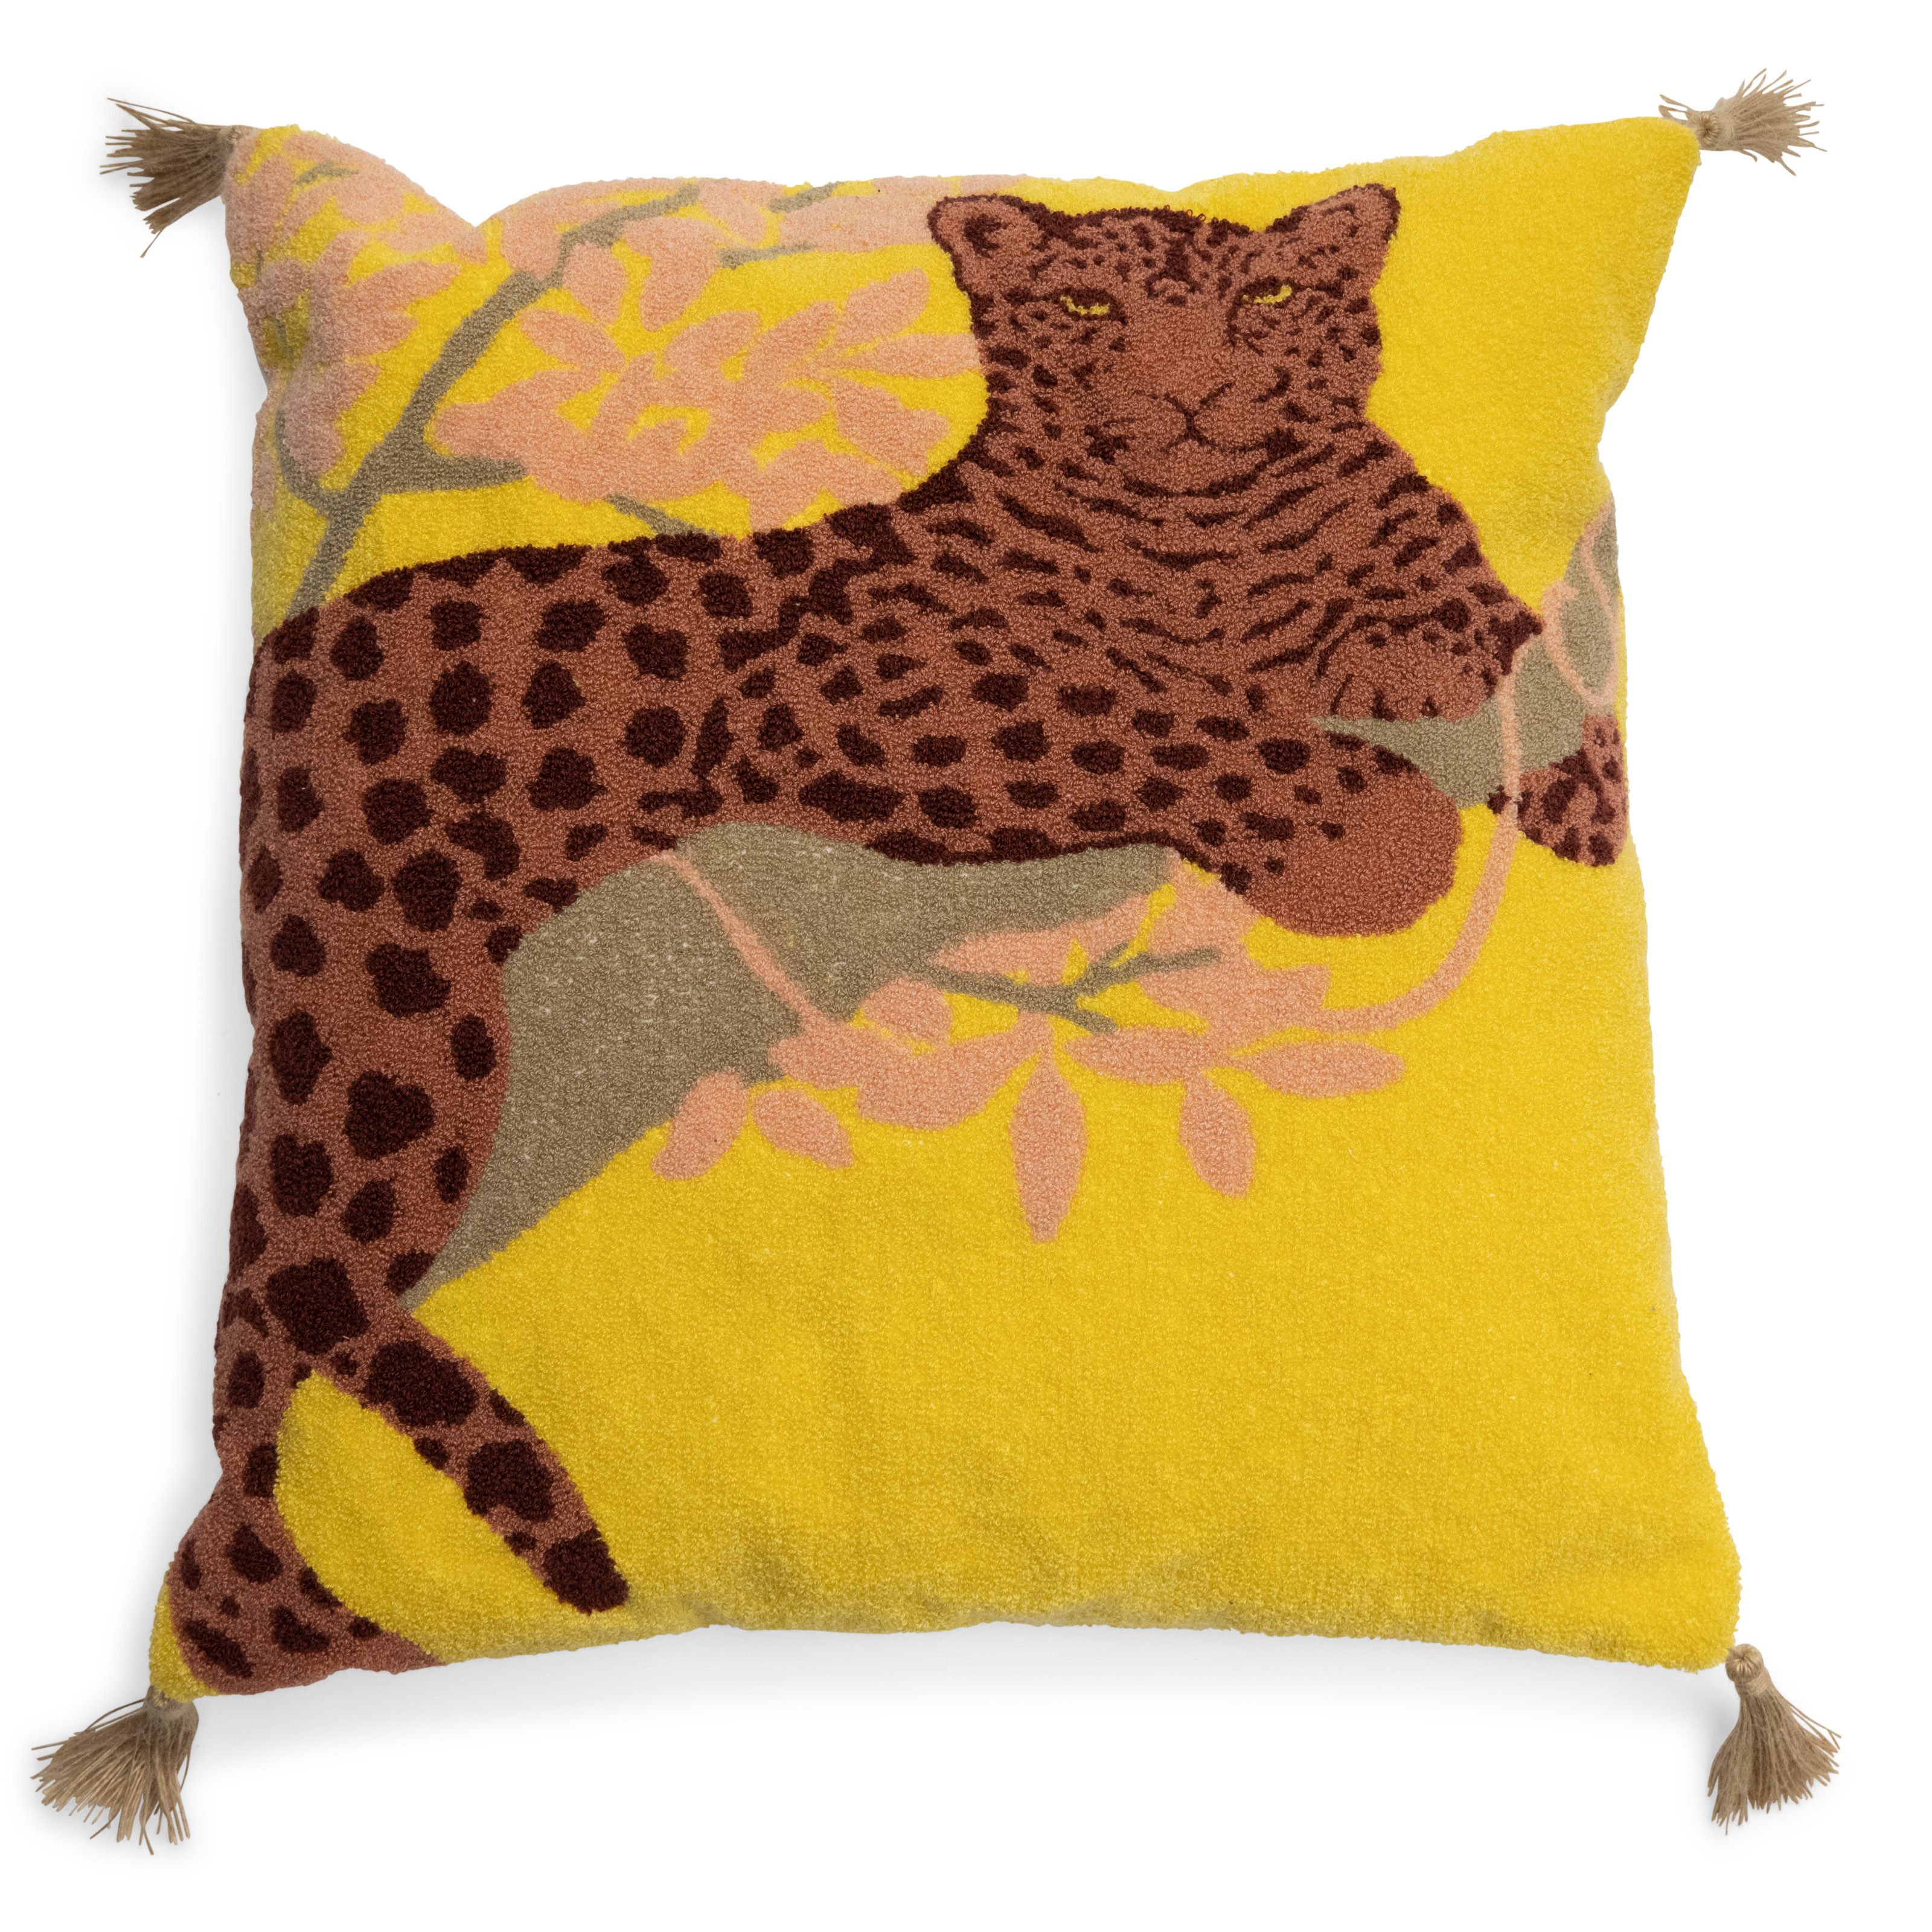 Leopard Boucle Embroidered Decorative Throw Pillow, 20x20" by Drew Barrymore Flower Home - image 1 of 2